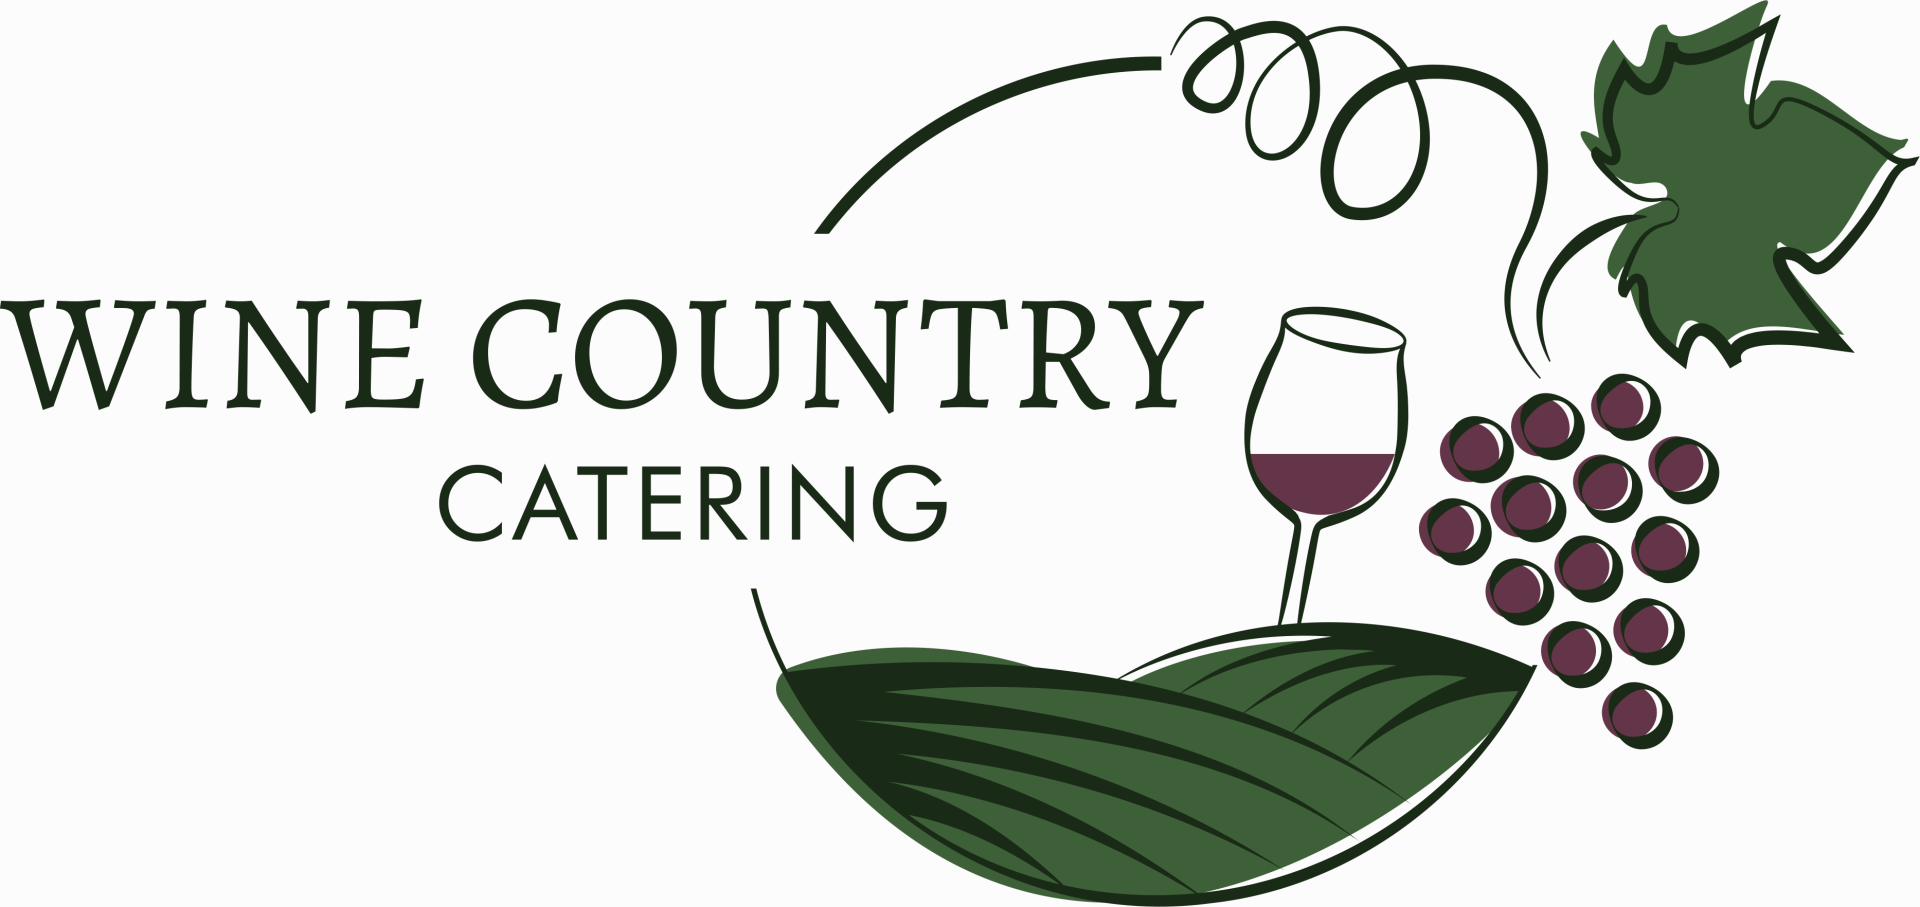 Wine Country Catering Logo